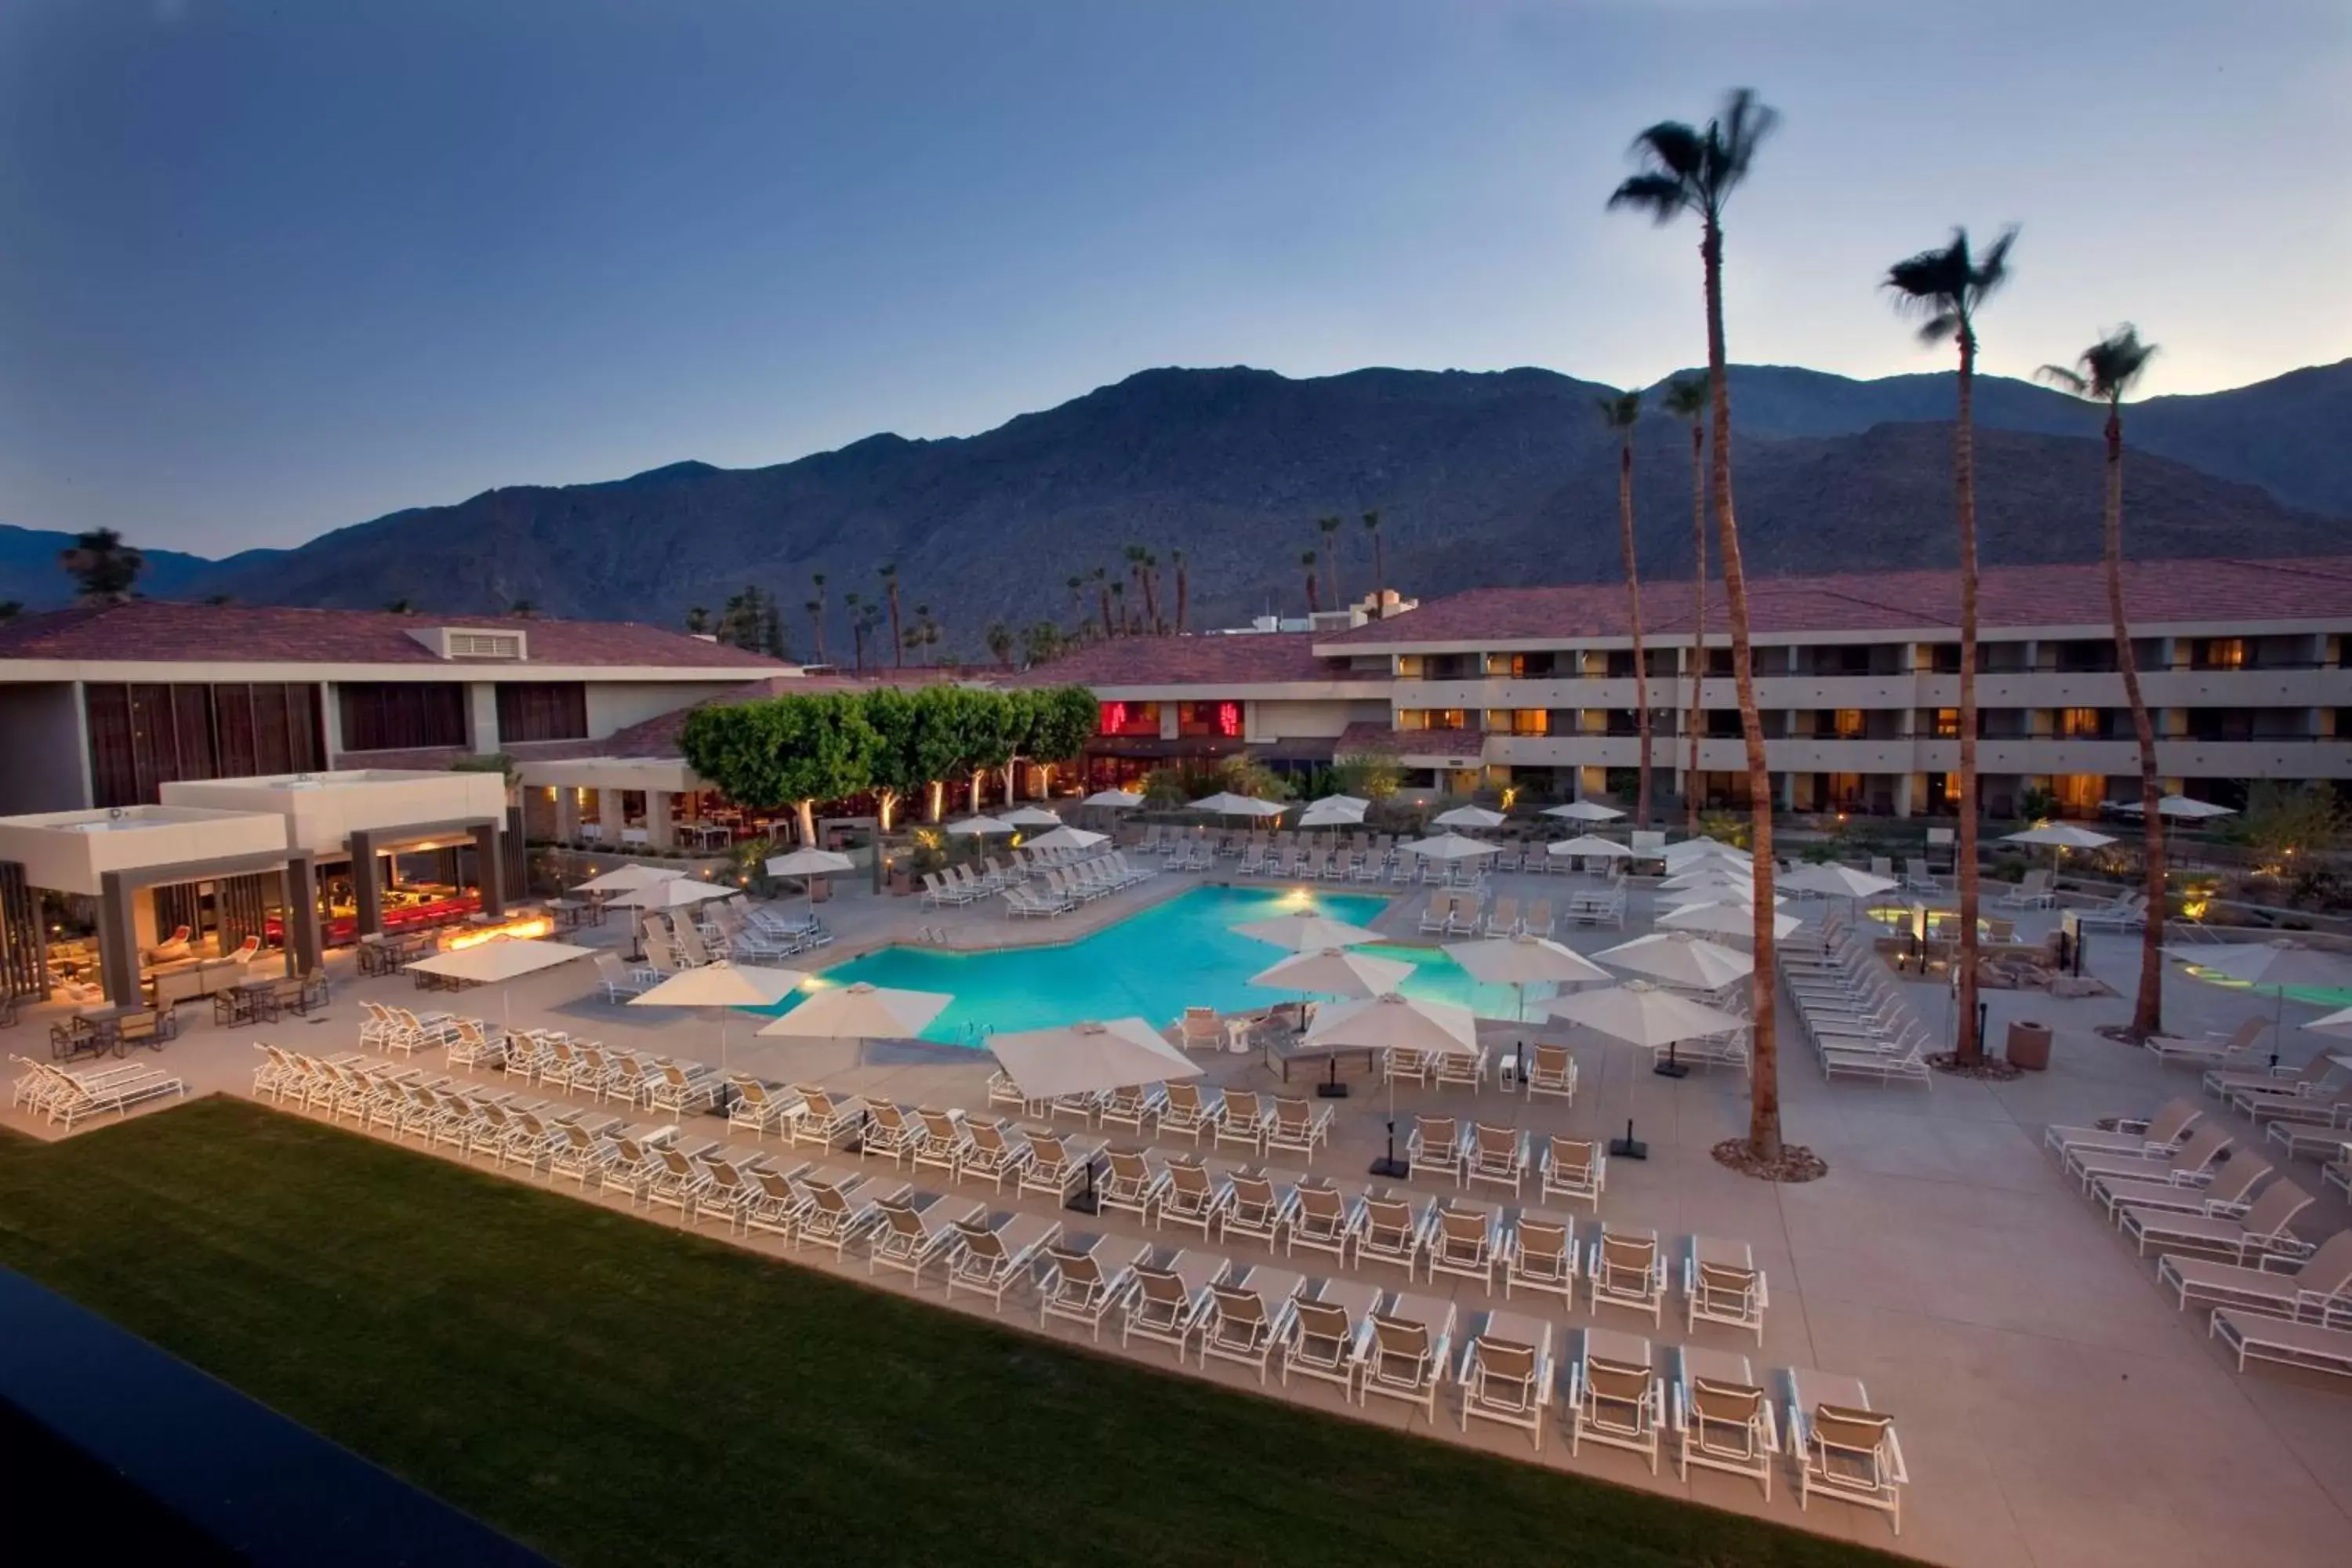 Property building, Pool View in Hilton Palm Springs